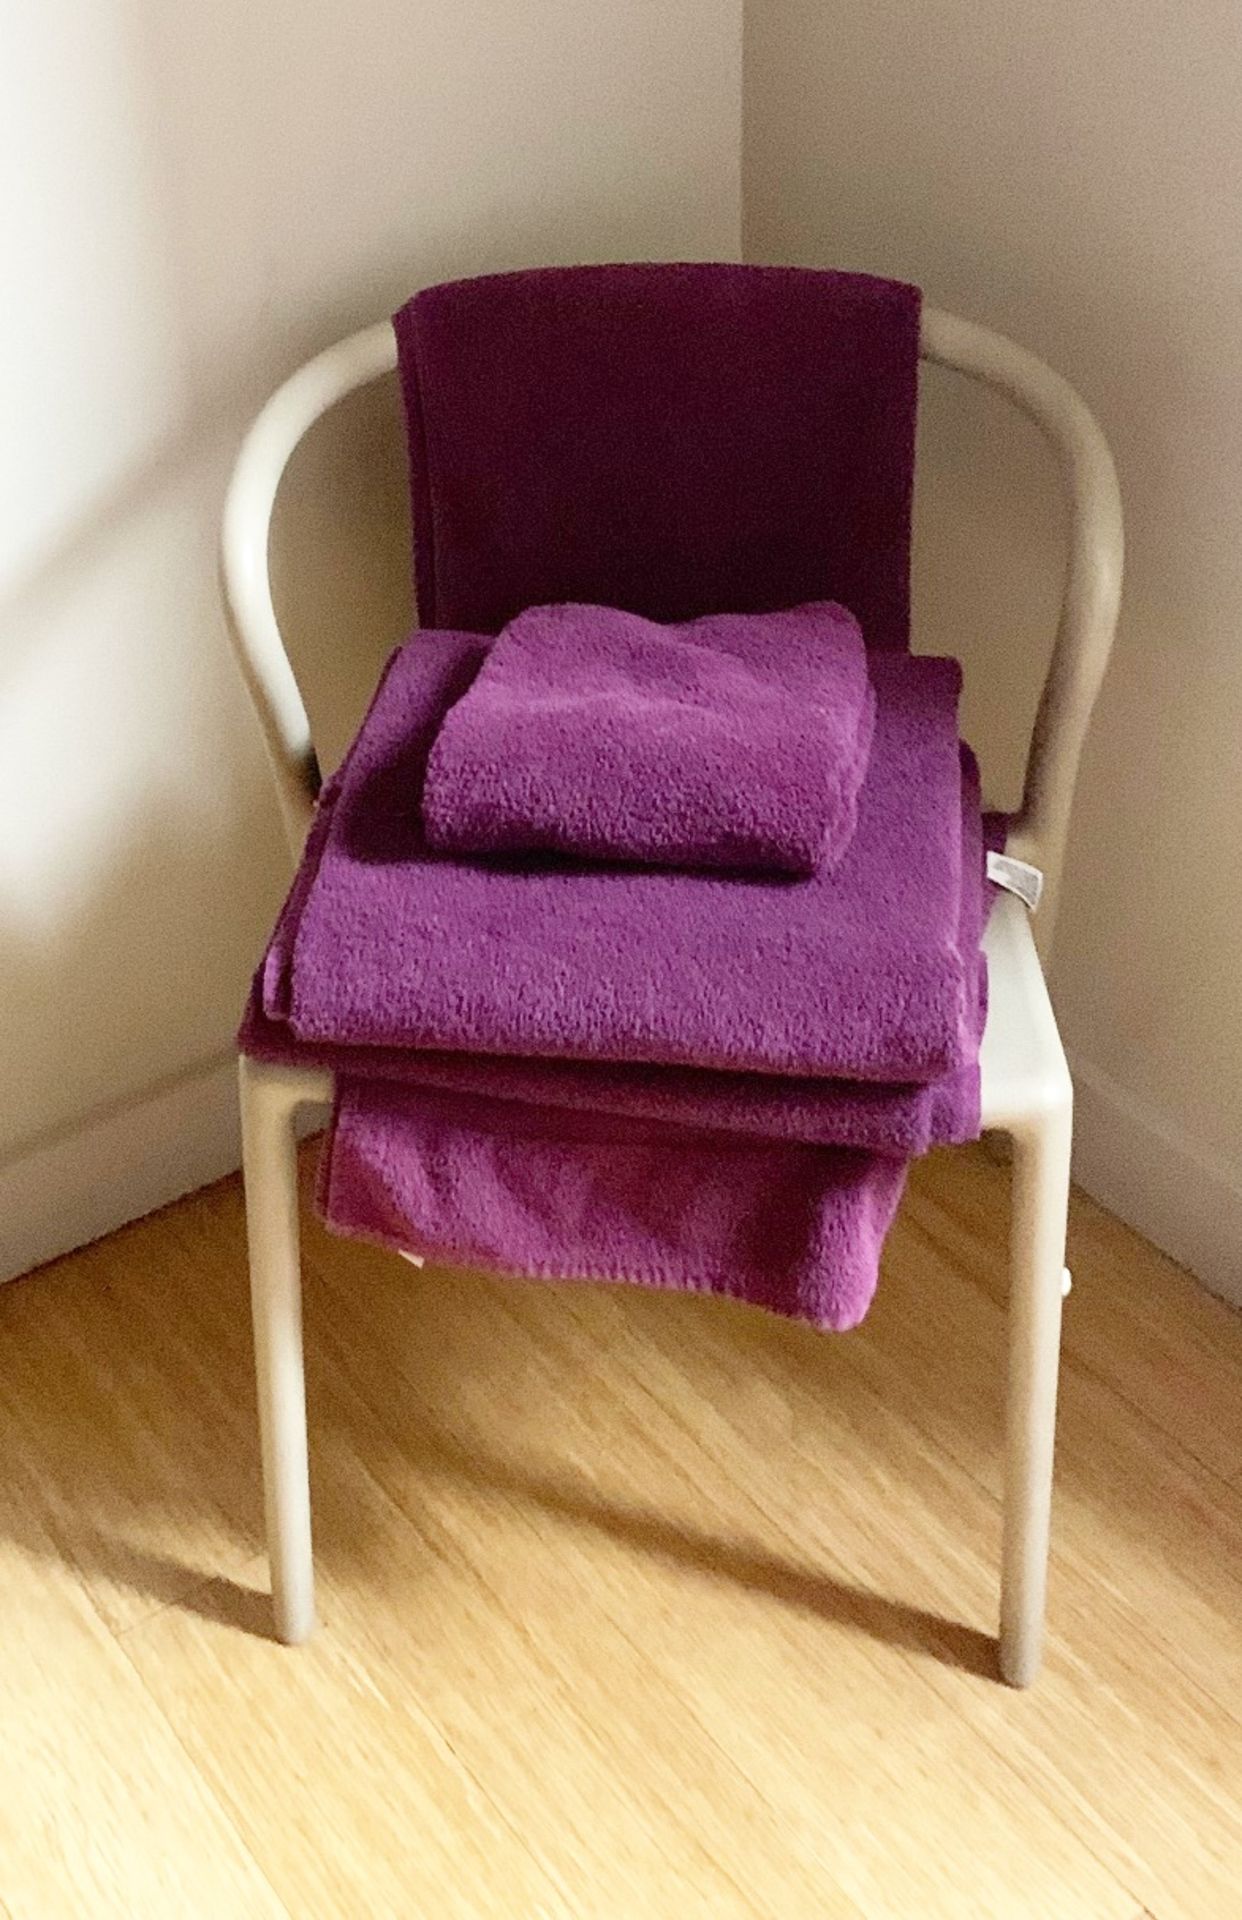 20 x Majestic Luxury 620gsm Bath Towels in Purple - Size LARGE - RRP £340 - CL587 - Location: Altrin - Image 5 of 5